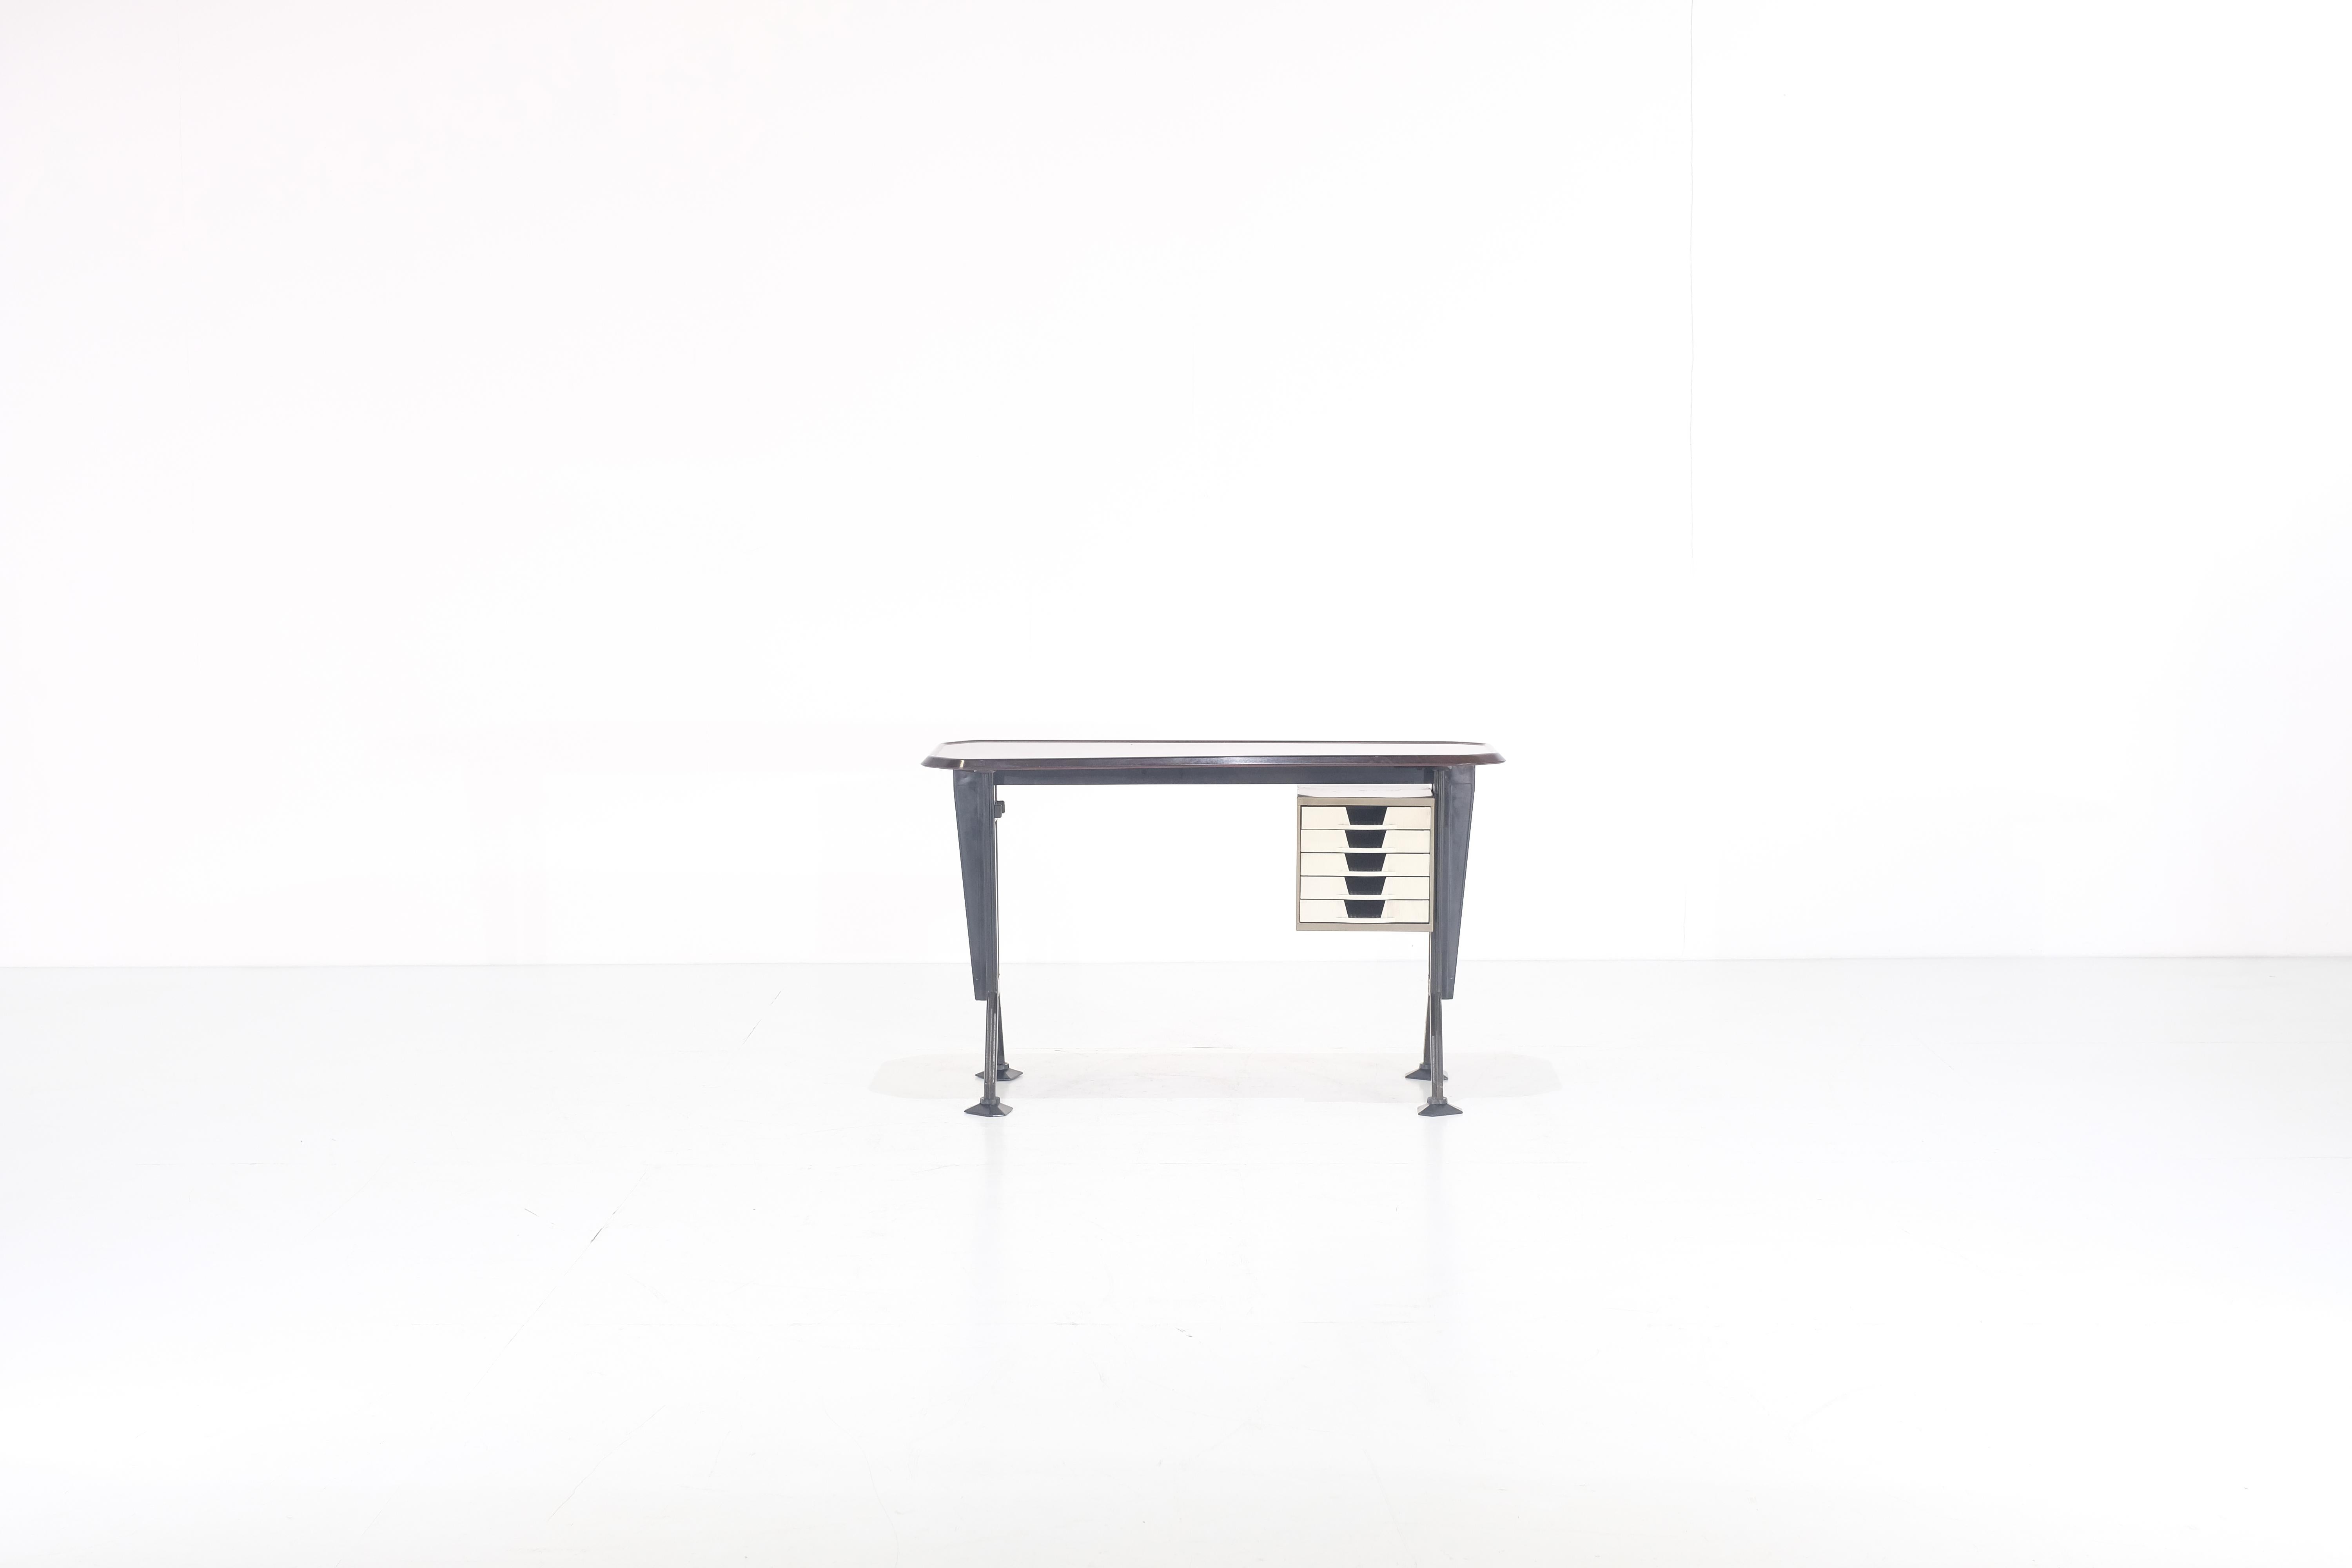 Amazing Desk from the second office furniture program, which was designed by Studio BBPR for Olivetti. Arco - the arch - is the basis of the design, the static element was shaped decoratively and shapes the architecture of the desk. 

The Desk is in